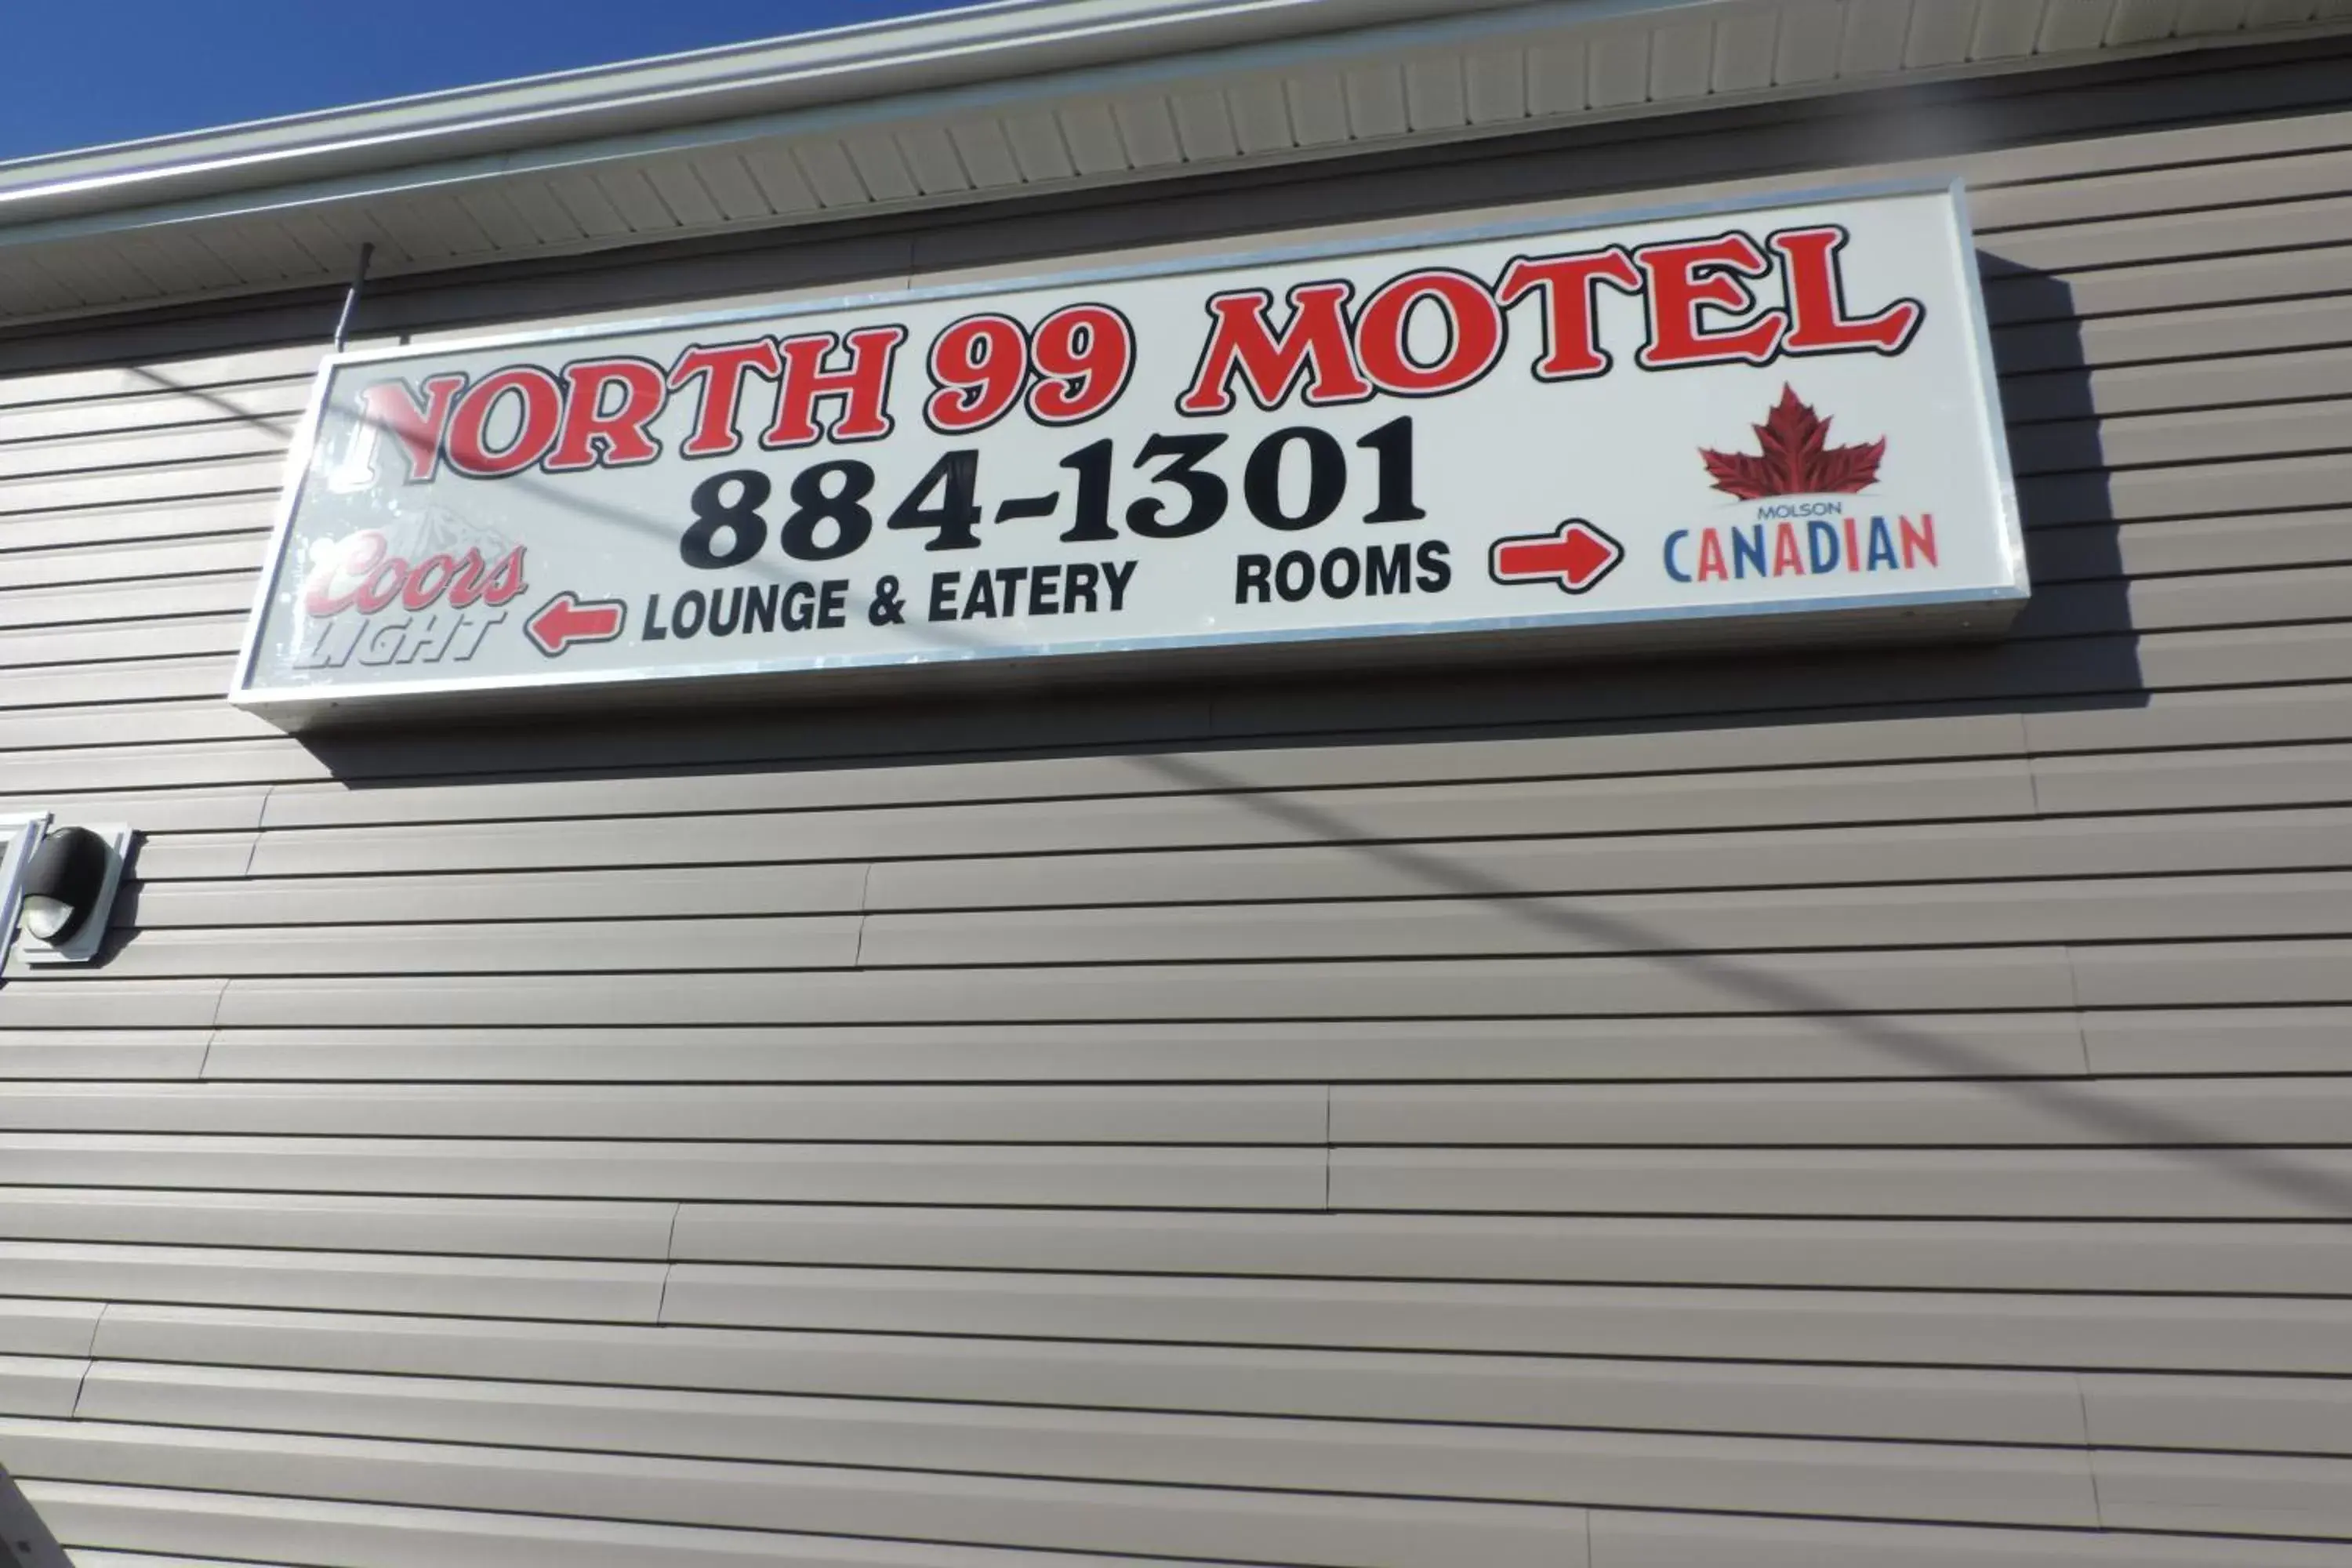 Property building in North 99 Motel